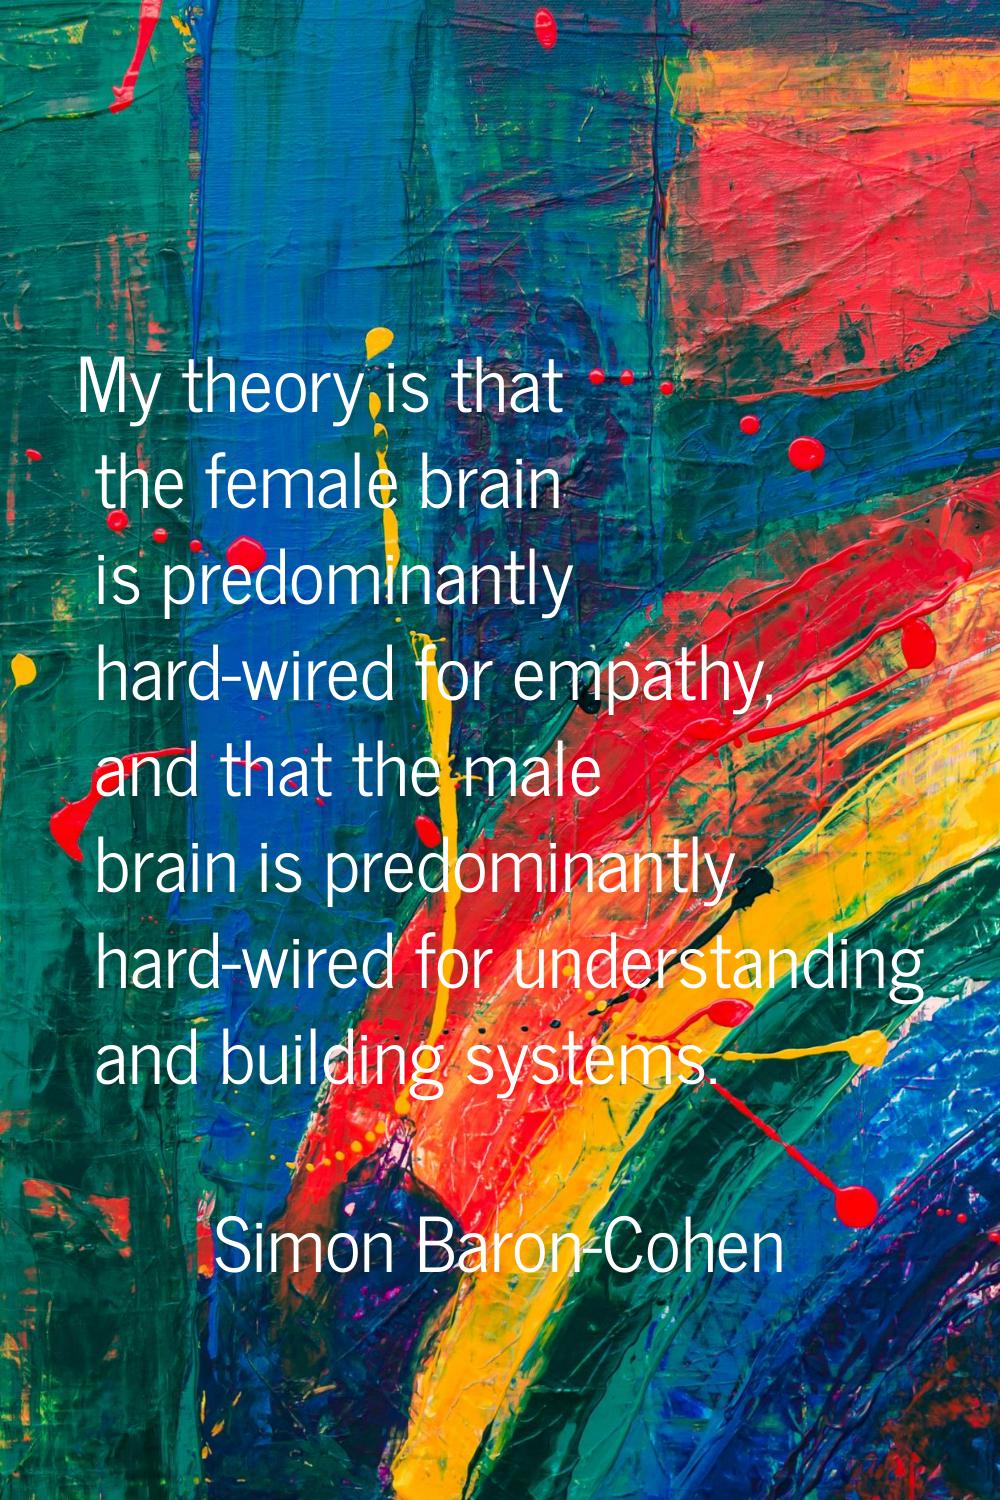 My theory is that the female brain is predominantly hard-wired for empathy, and that the male brain